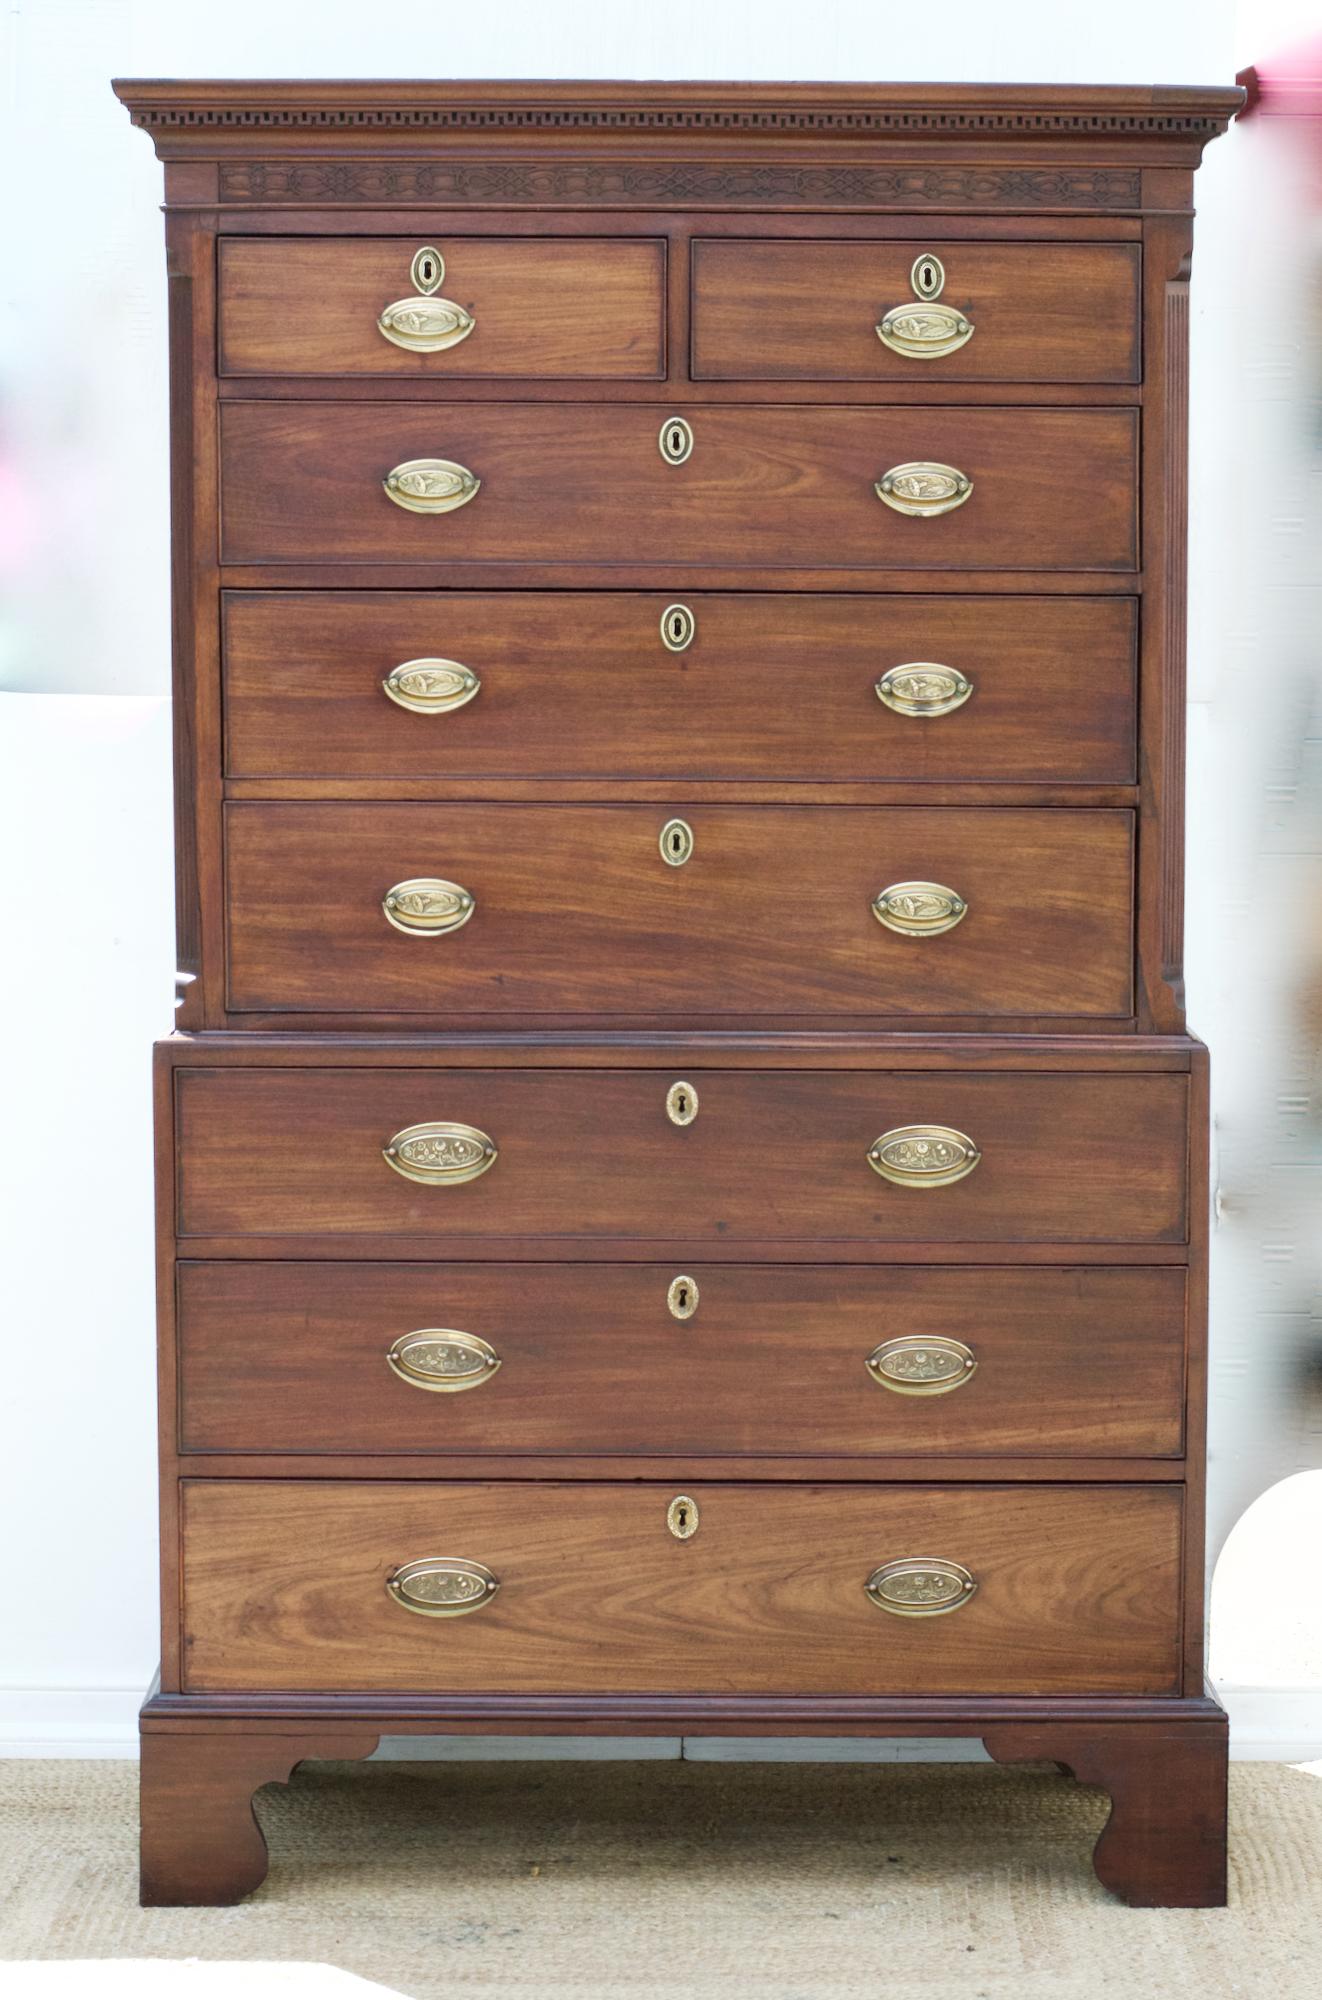 A period George III chest on chest having Greek key moulding atop the two short over three long drawers that reside above a lower dresser base having three long and gently graduating drawers. The Classic and stalwart storage dresser is in the